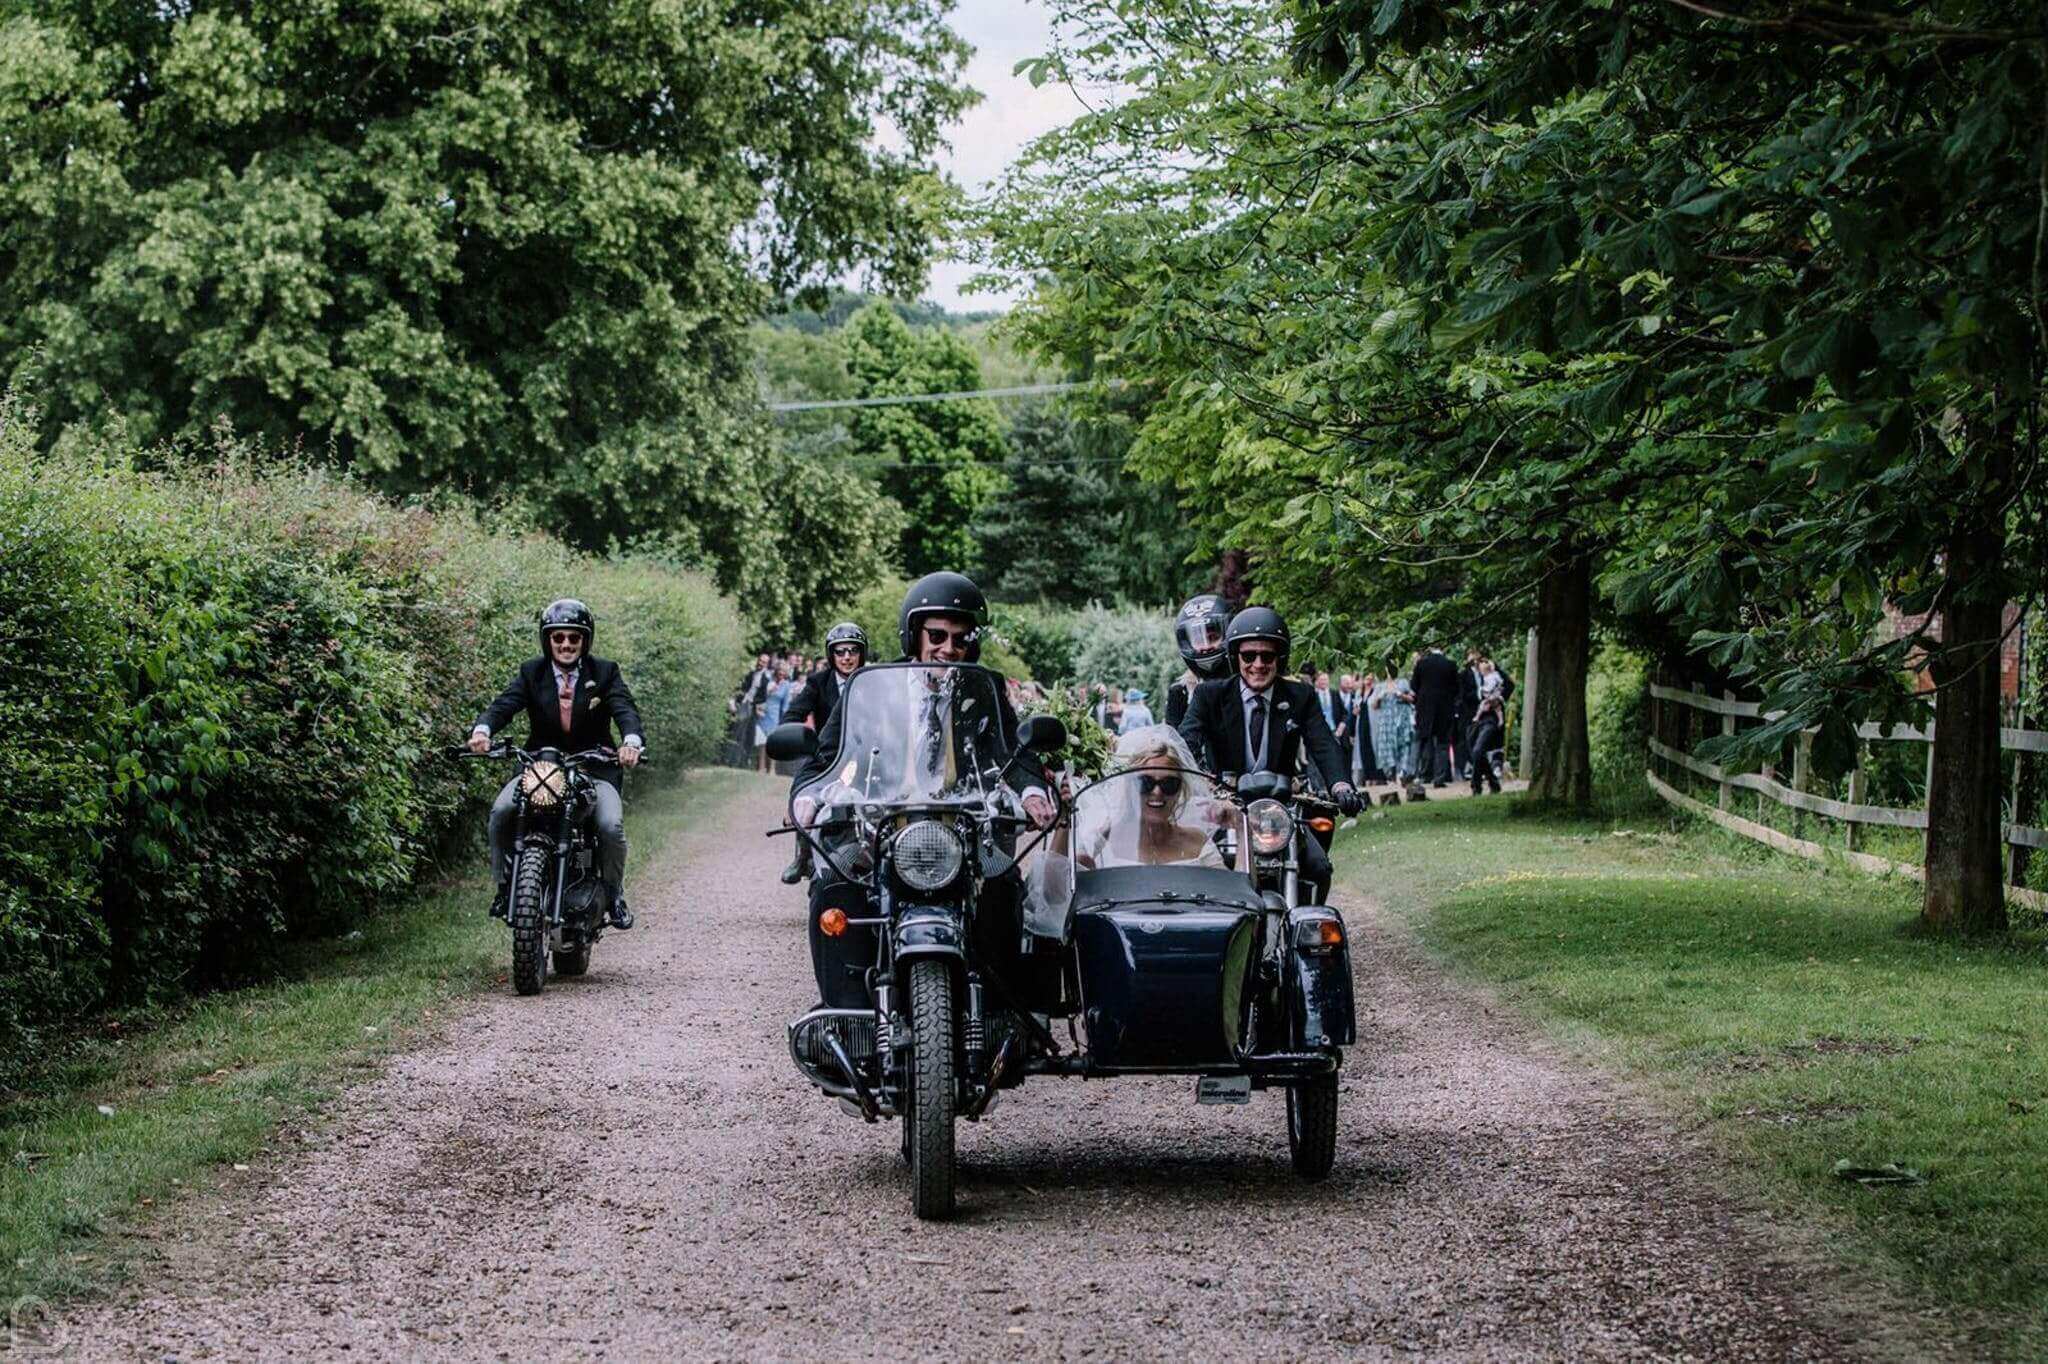 bowhayes farm wedding party rolling in on moterbikes, with bride in the sidecar